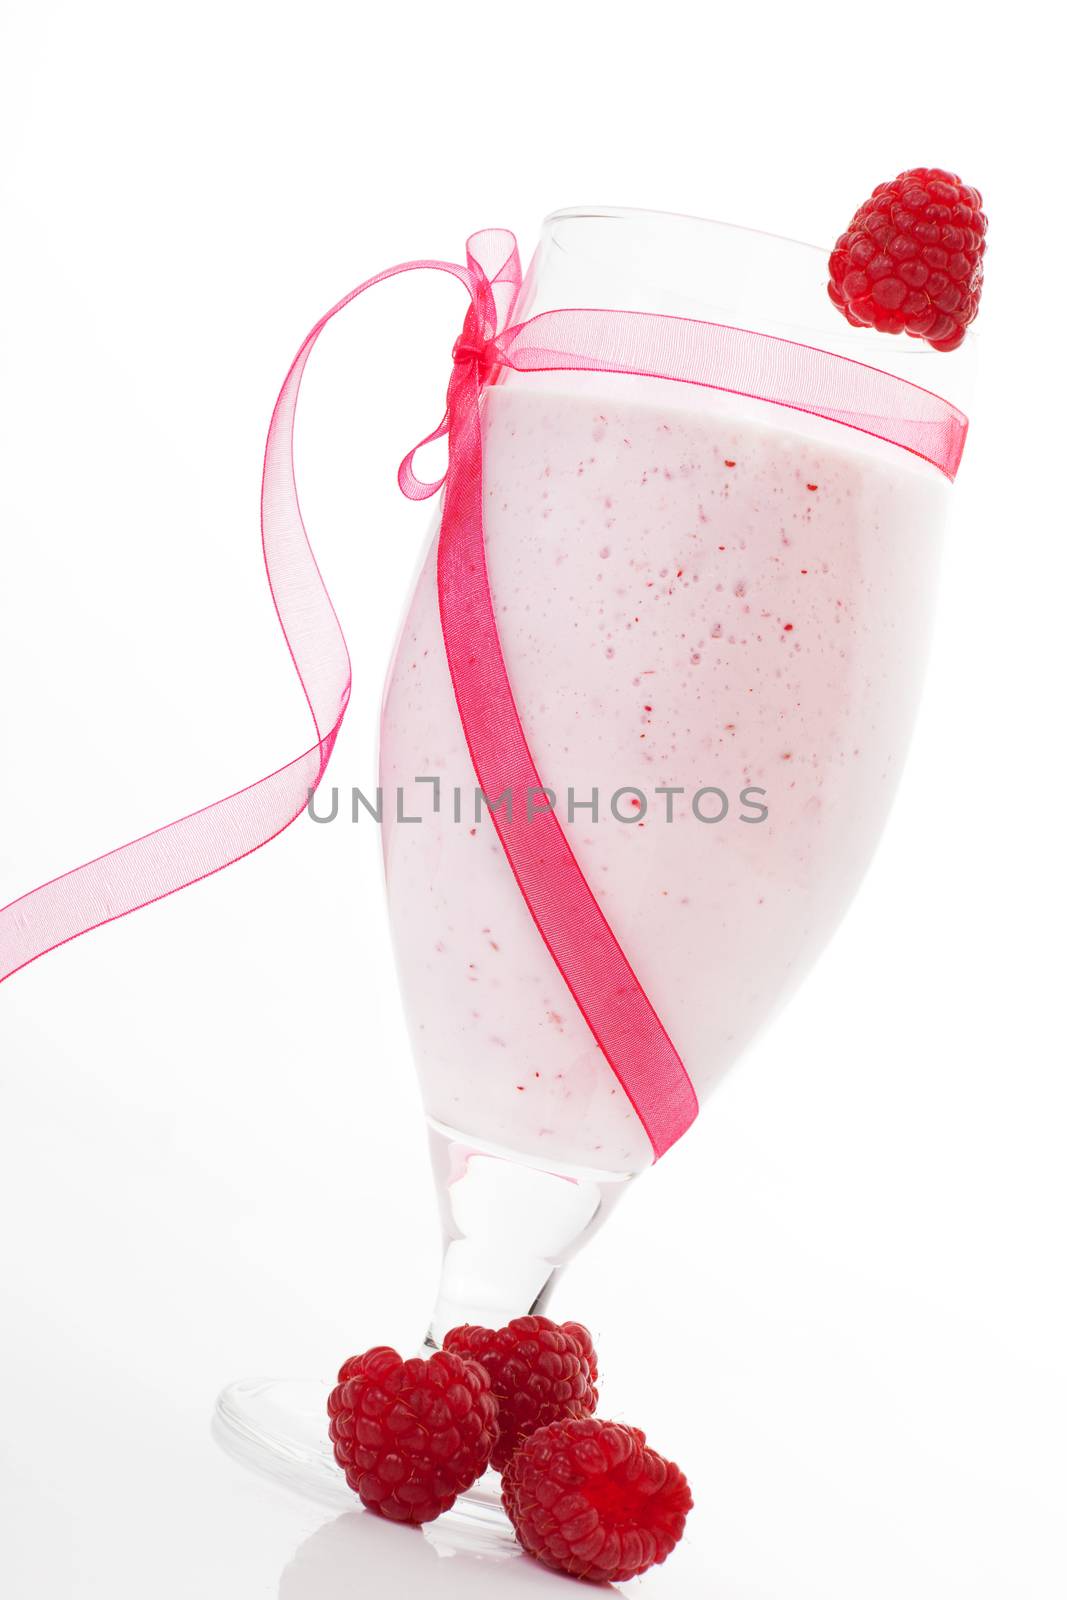 Delicious raspberry fruit shake isolated on white background. Fruity summer concept.